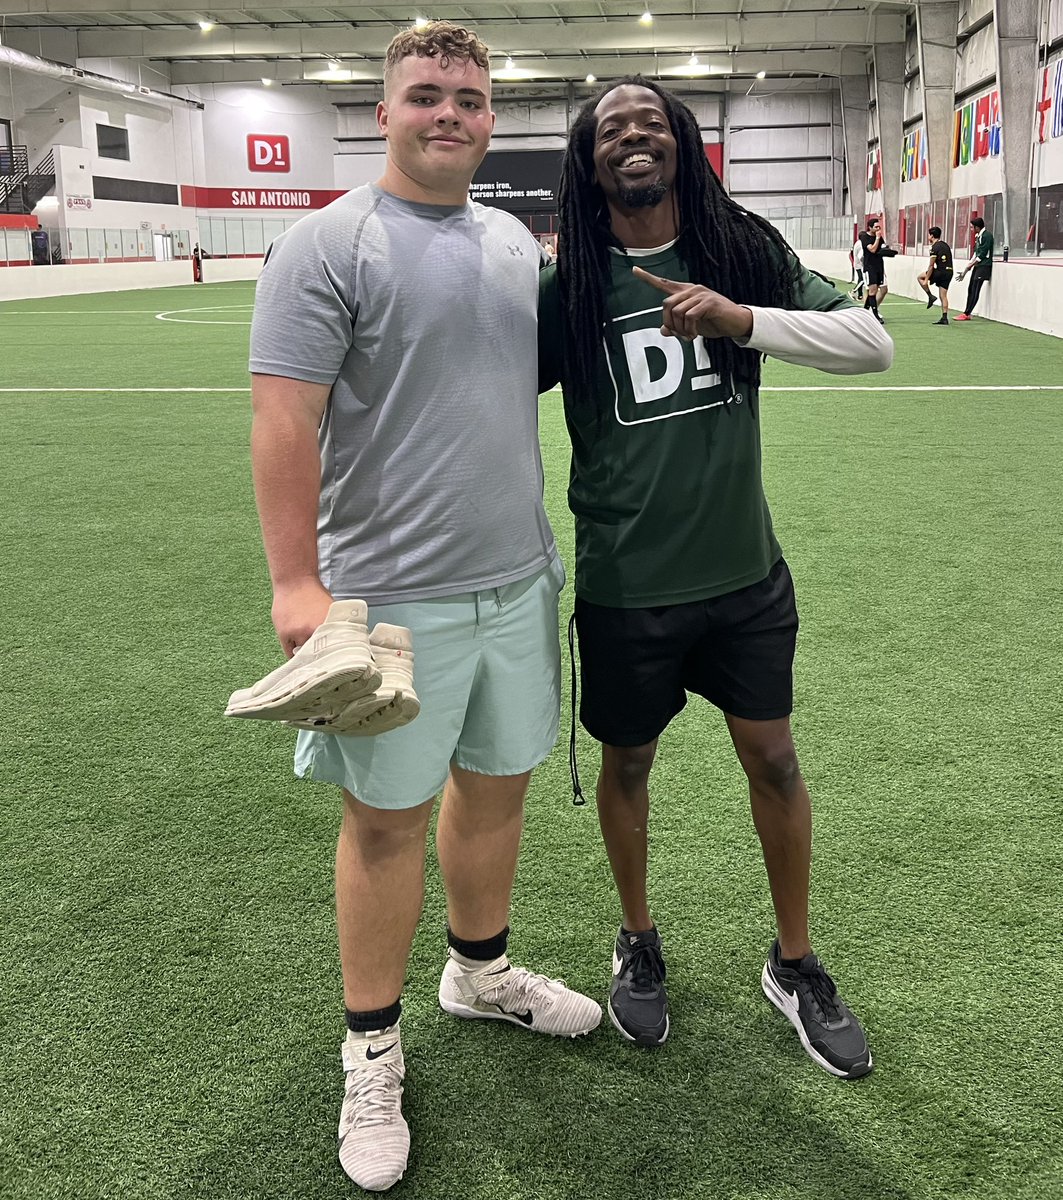 Has a great time putting in work with @brentholmes21 at D1 Training in San Antonio.